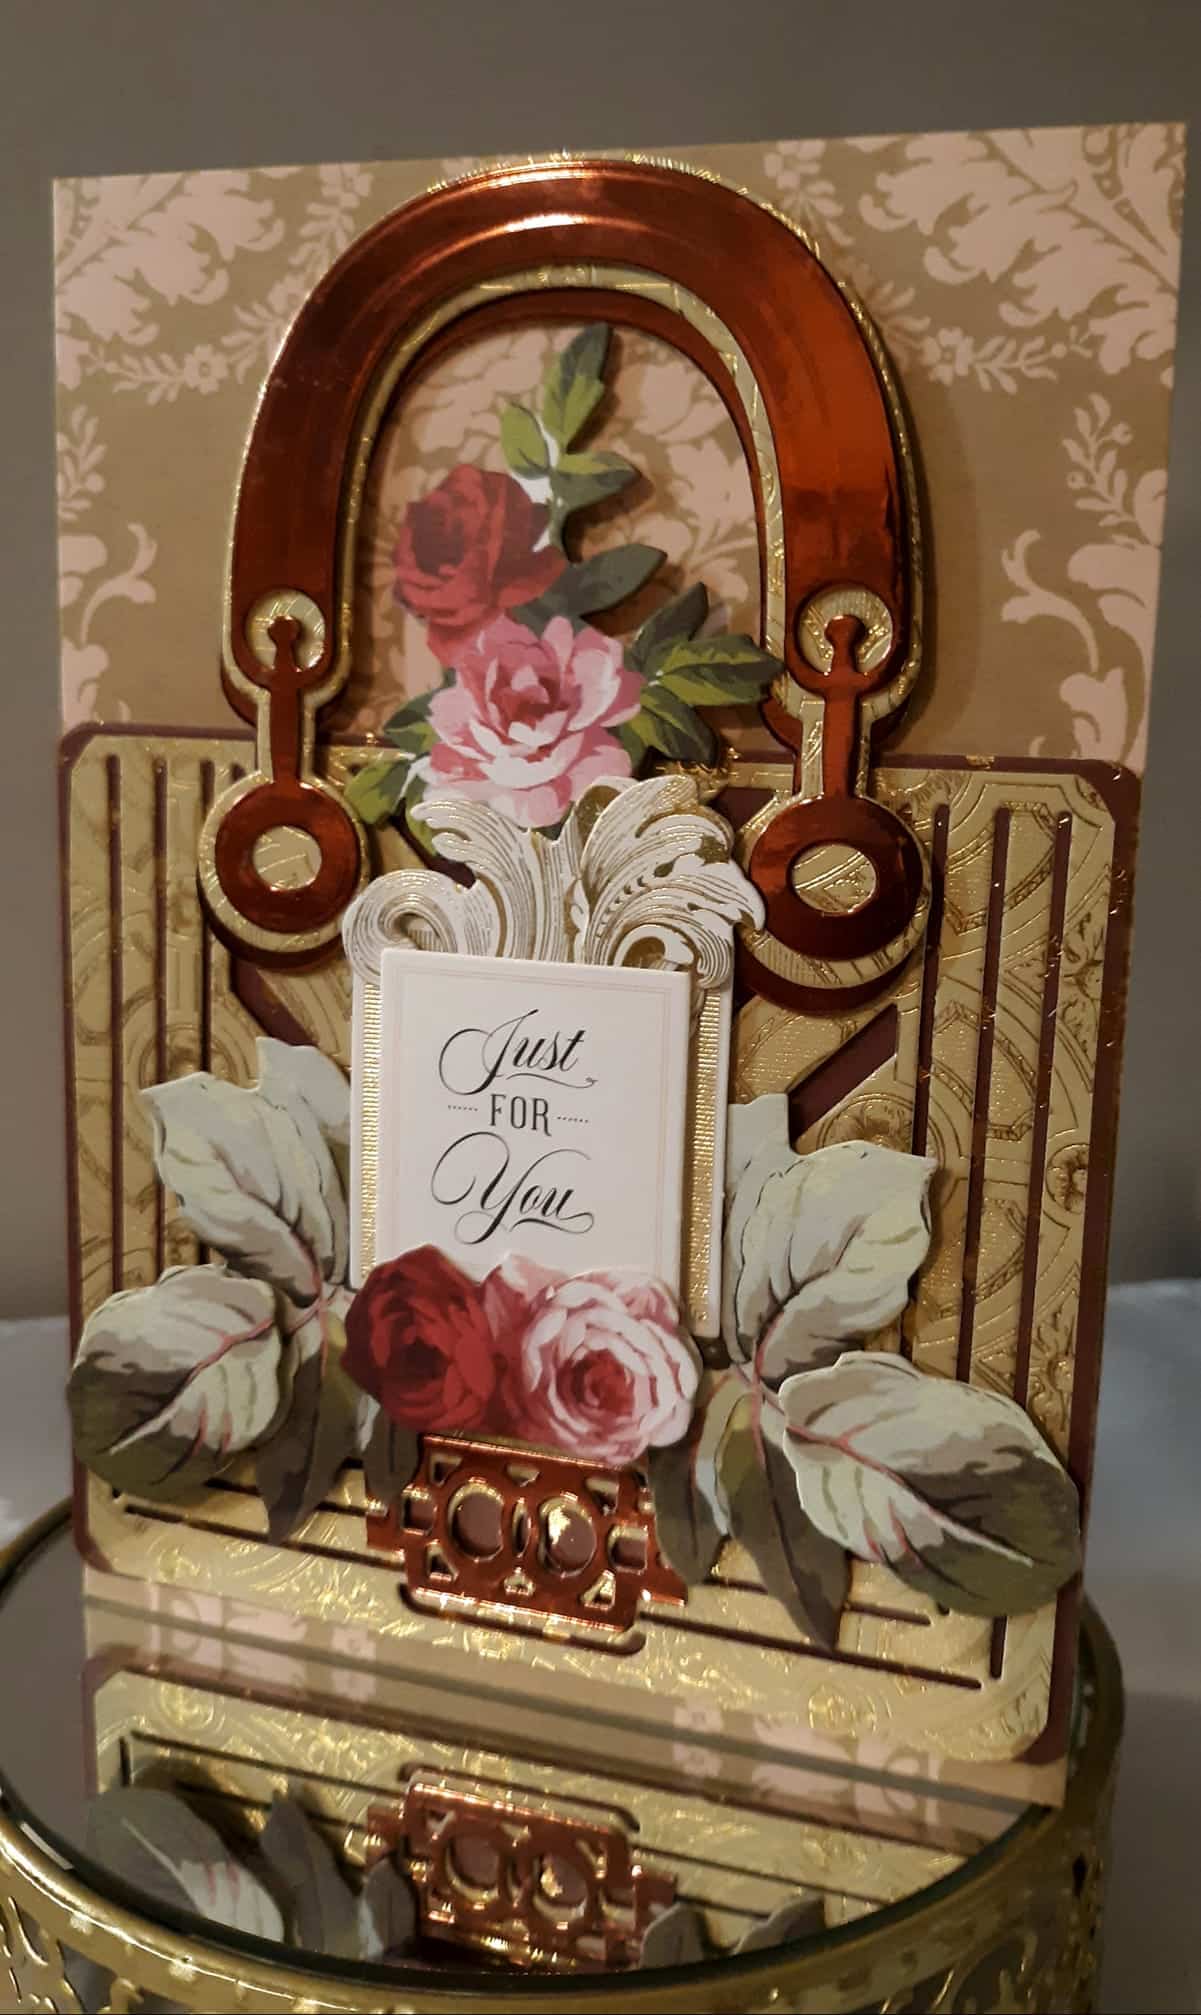 a close up of a card on a table.